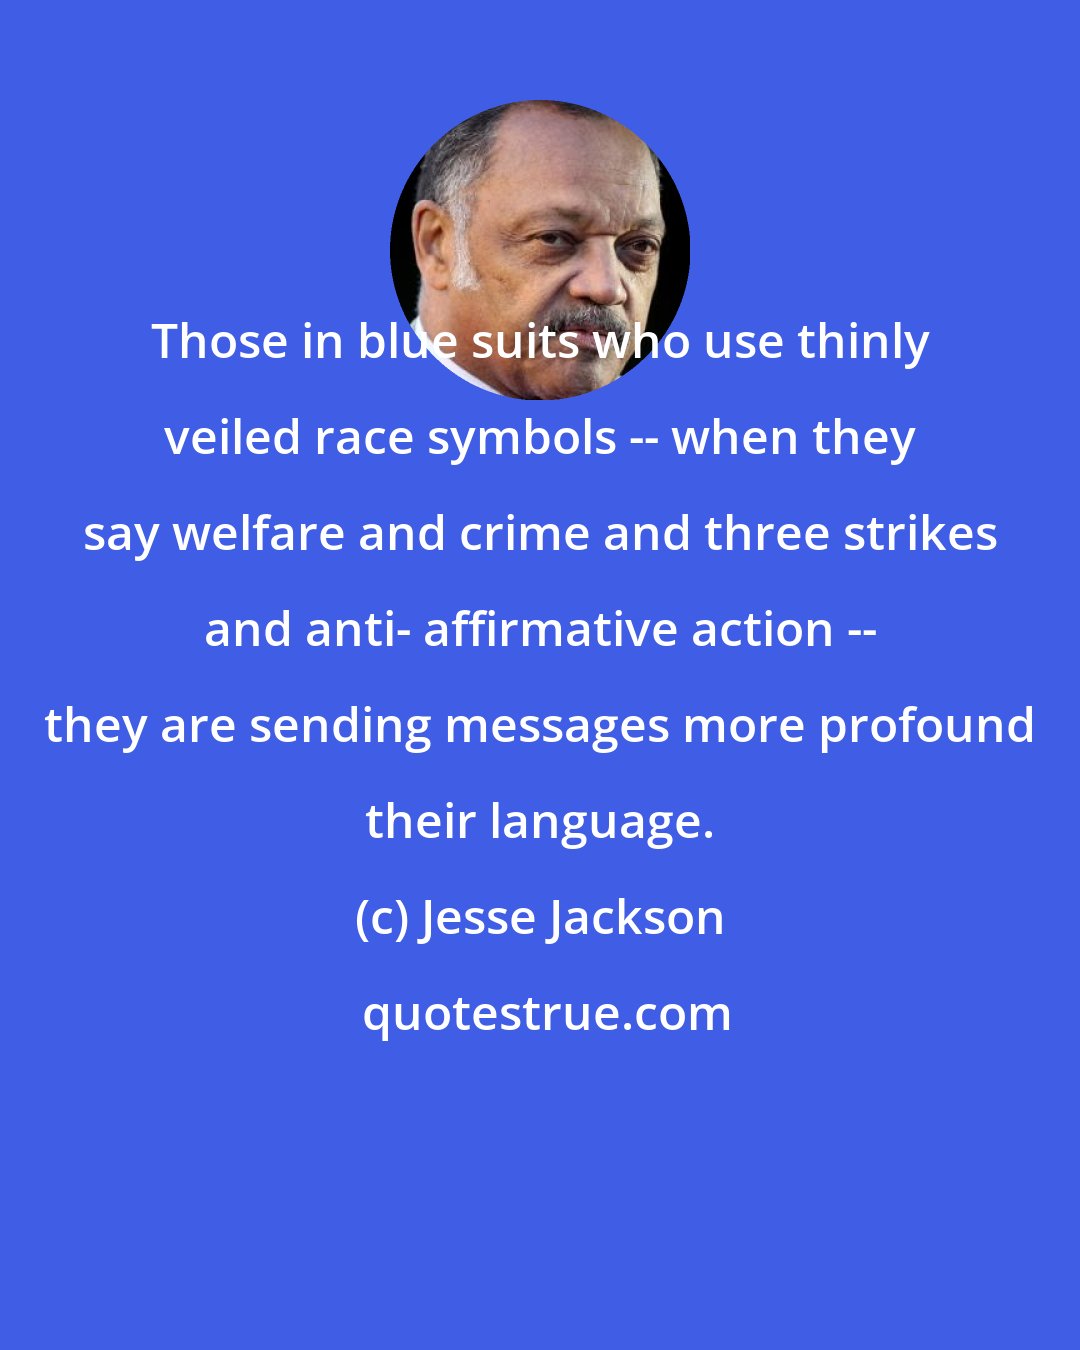 Jesse Jackson: Those in blue suits who use thinly veiled race symbols -- when they say welfare and crime and three strikes and anti- affirmative action -- they are sending messages more profound their language.